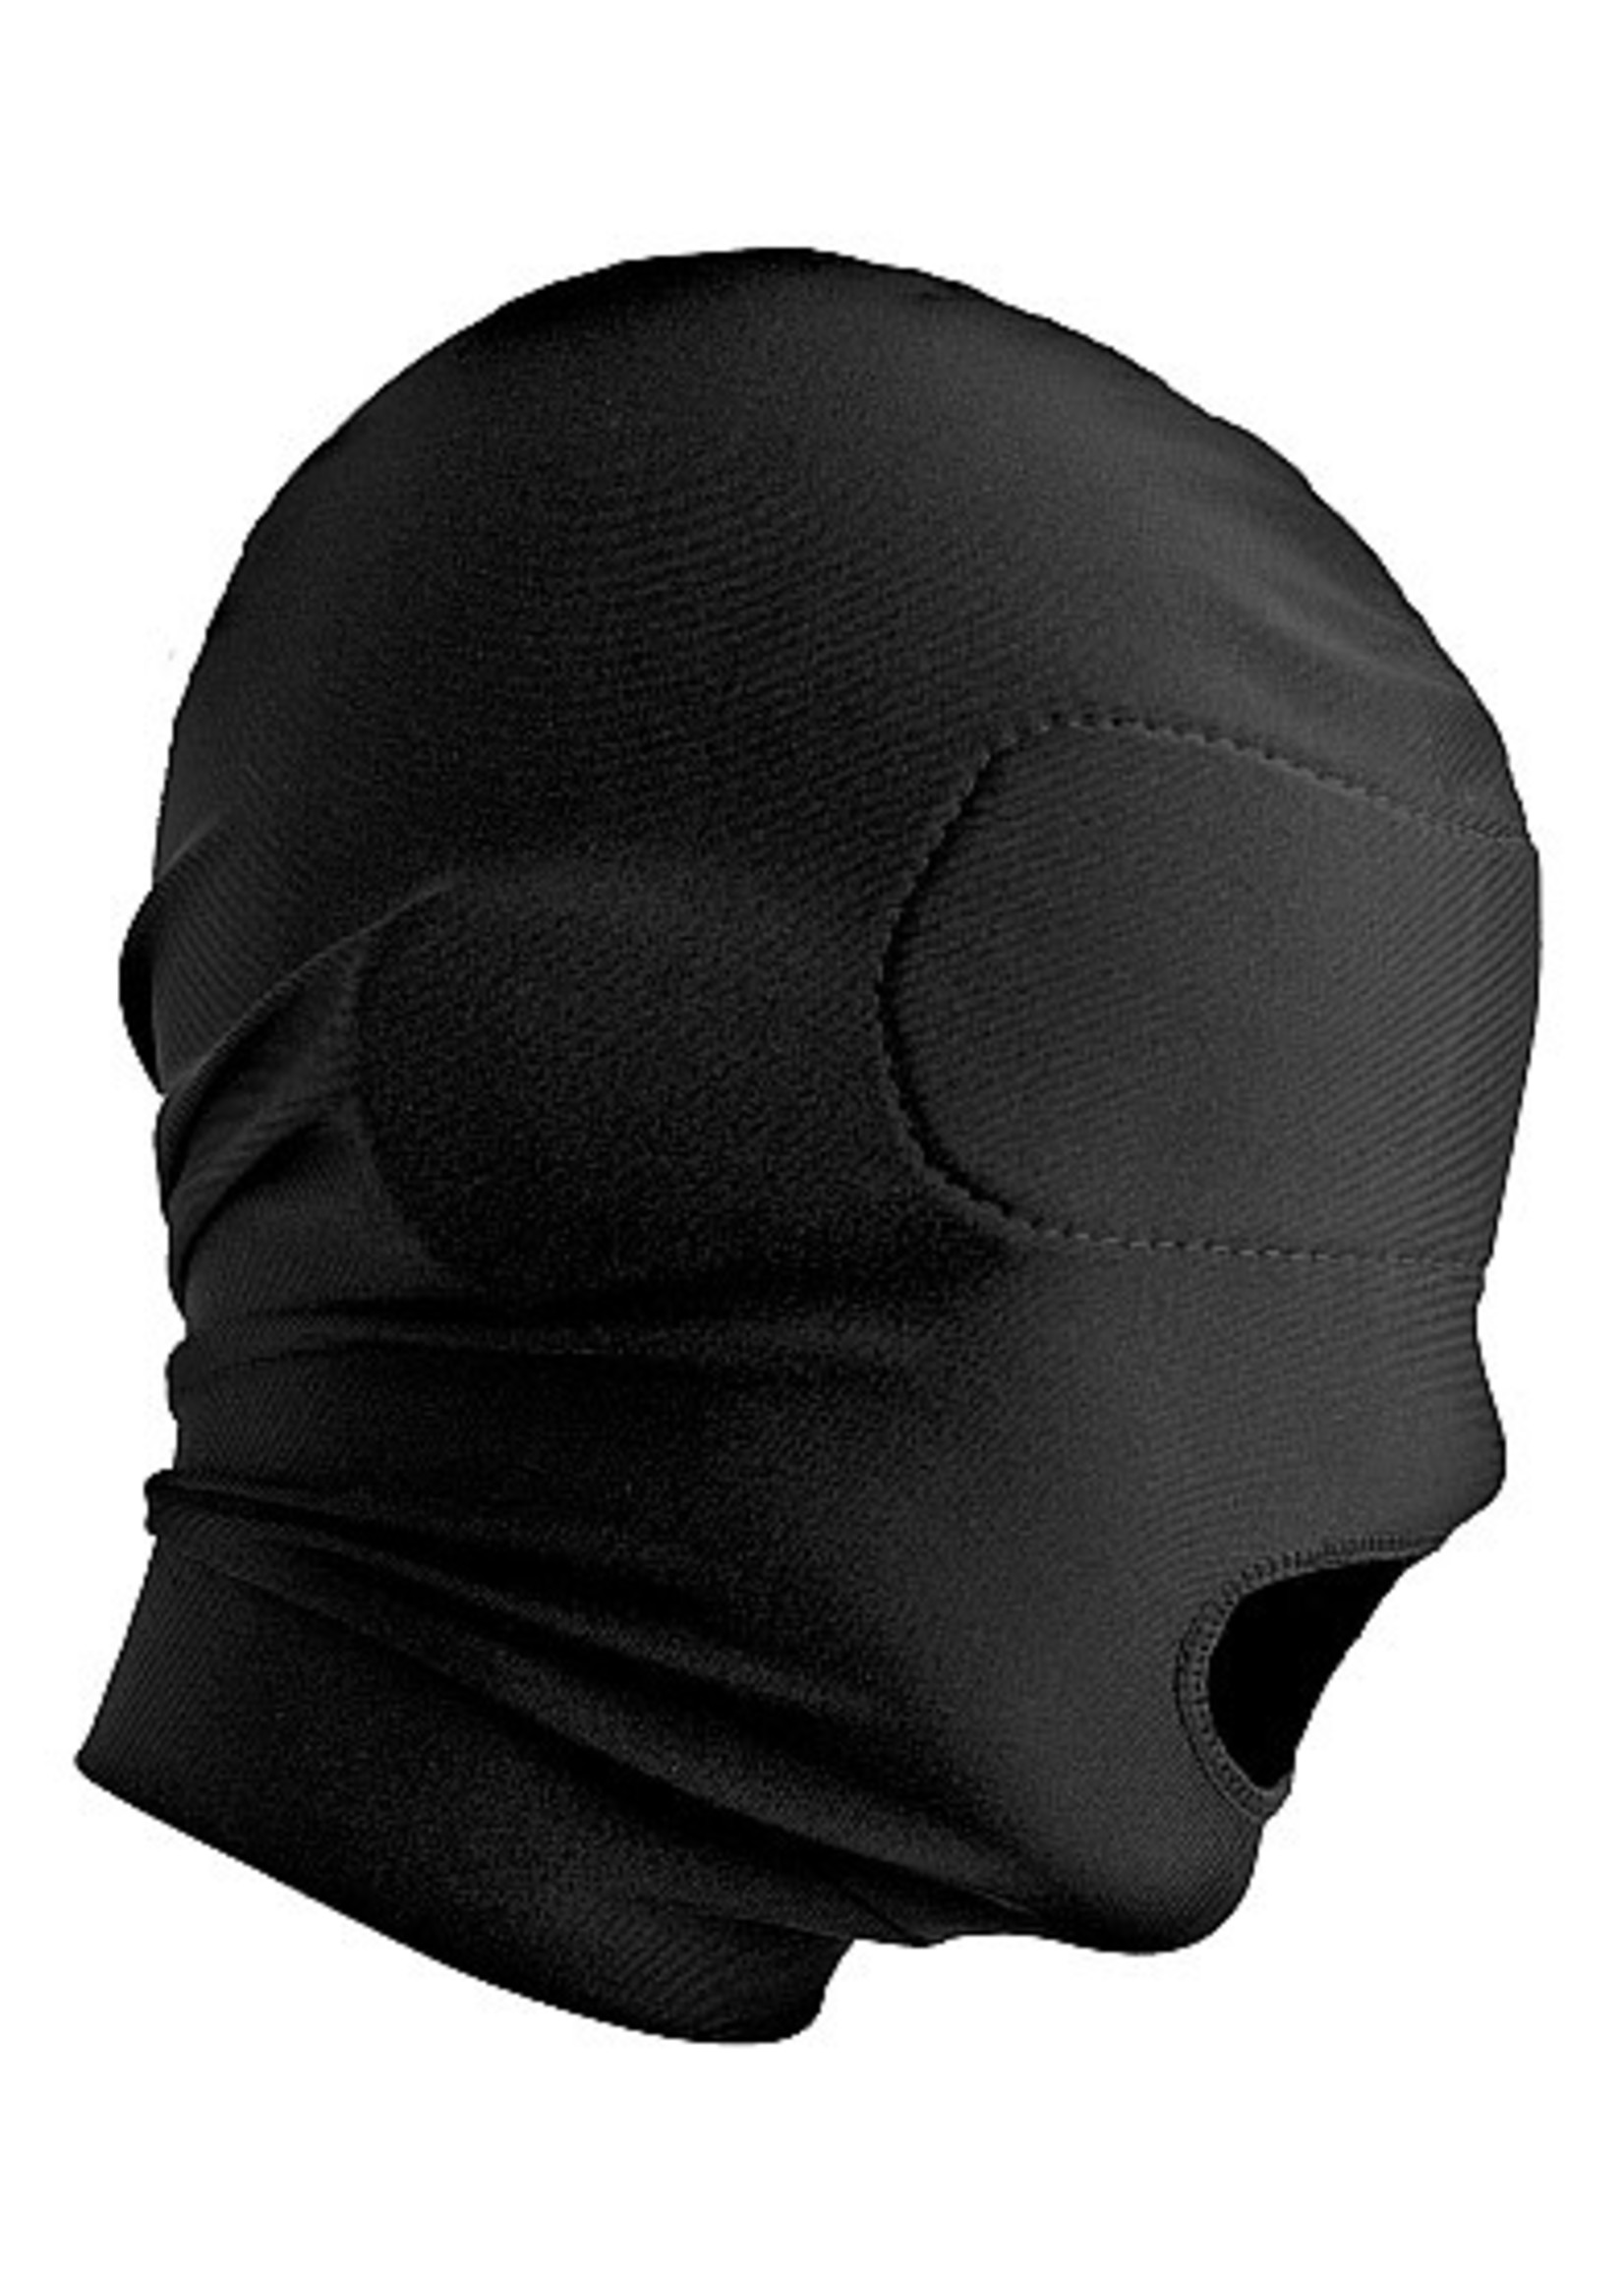 Master Series Disguise open mouth hood OneSize